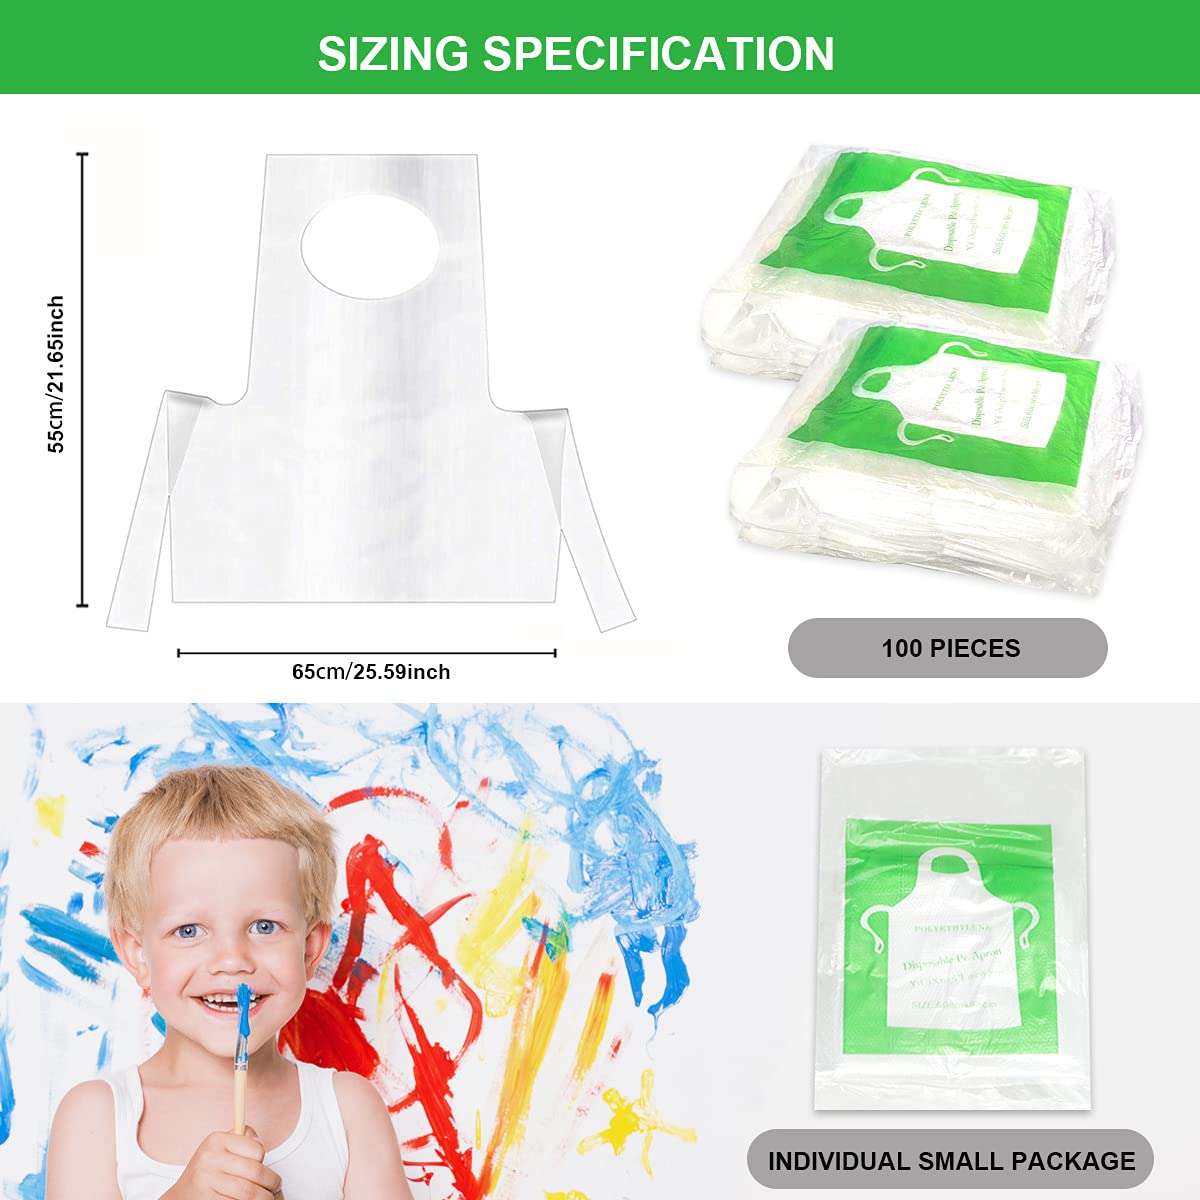 Disposable Aprons Plastic Aprons for Kids Small Clear Polythene Waterproof Great for Painting, Cooking, Age 4-12